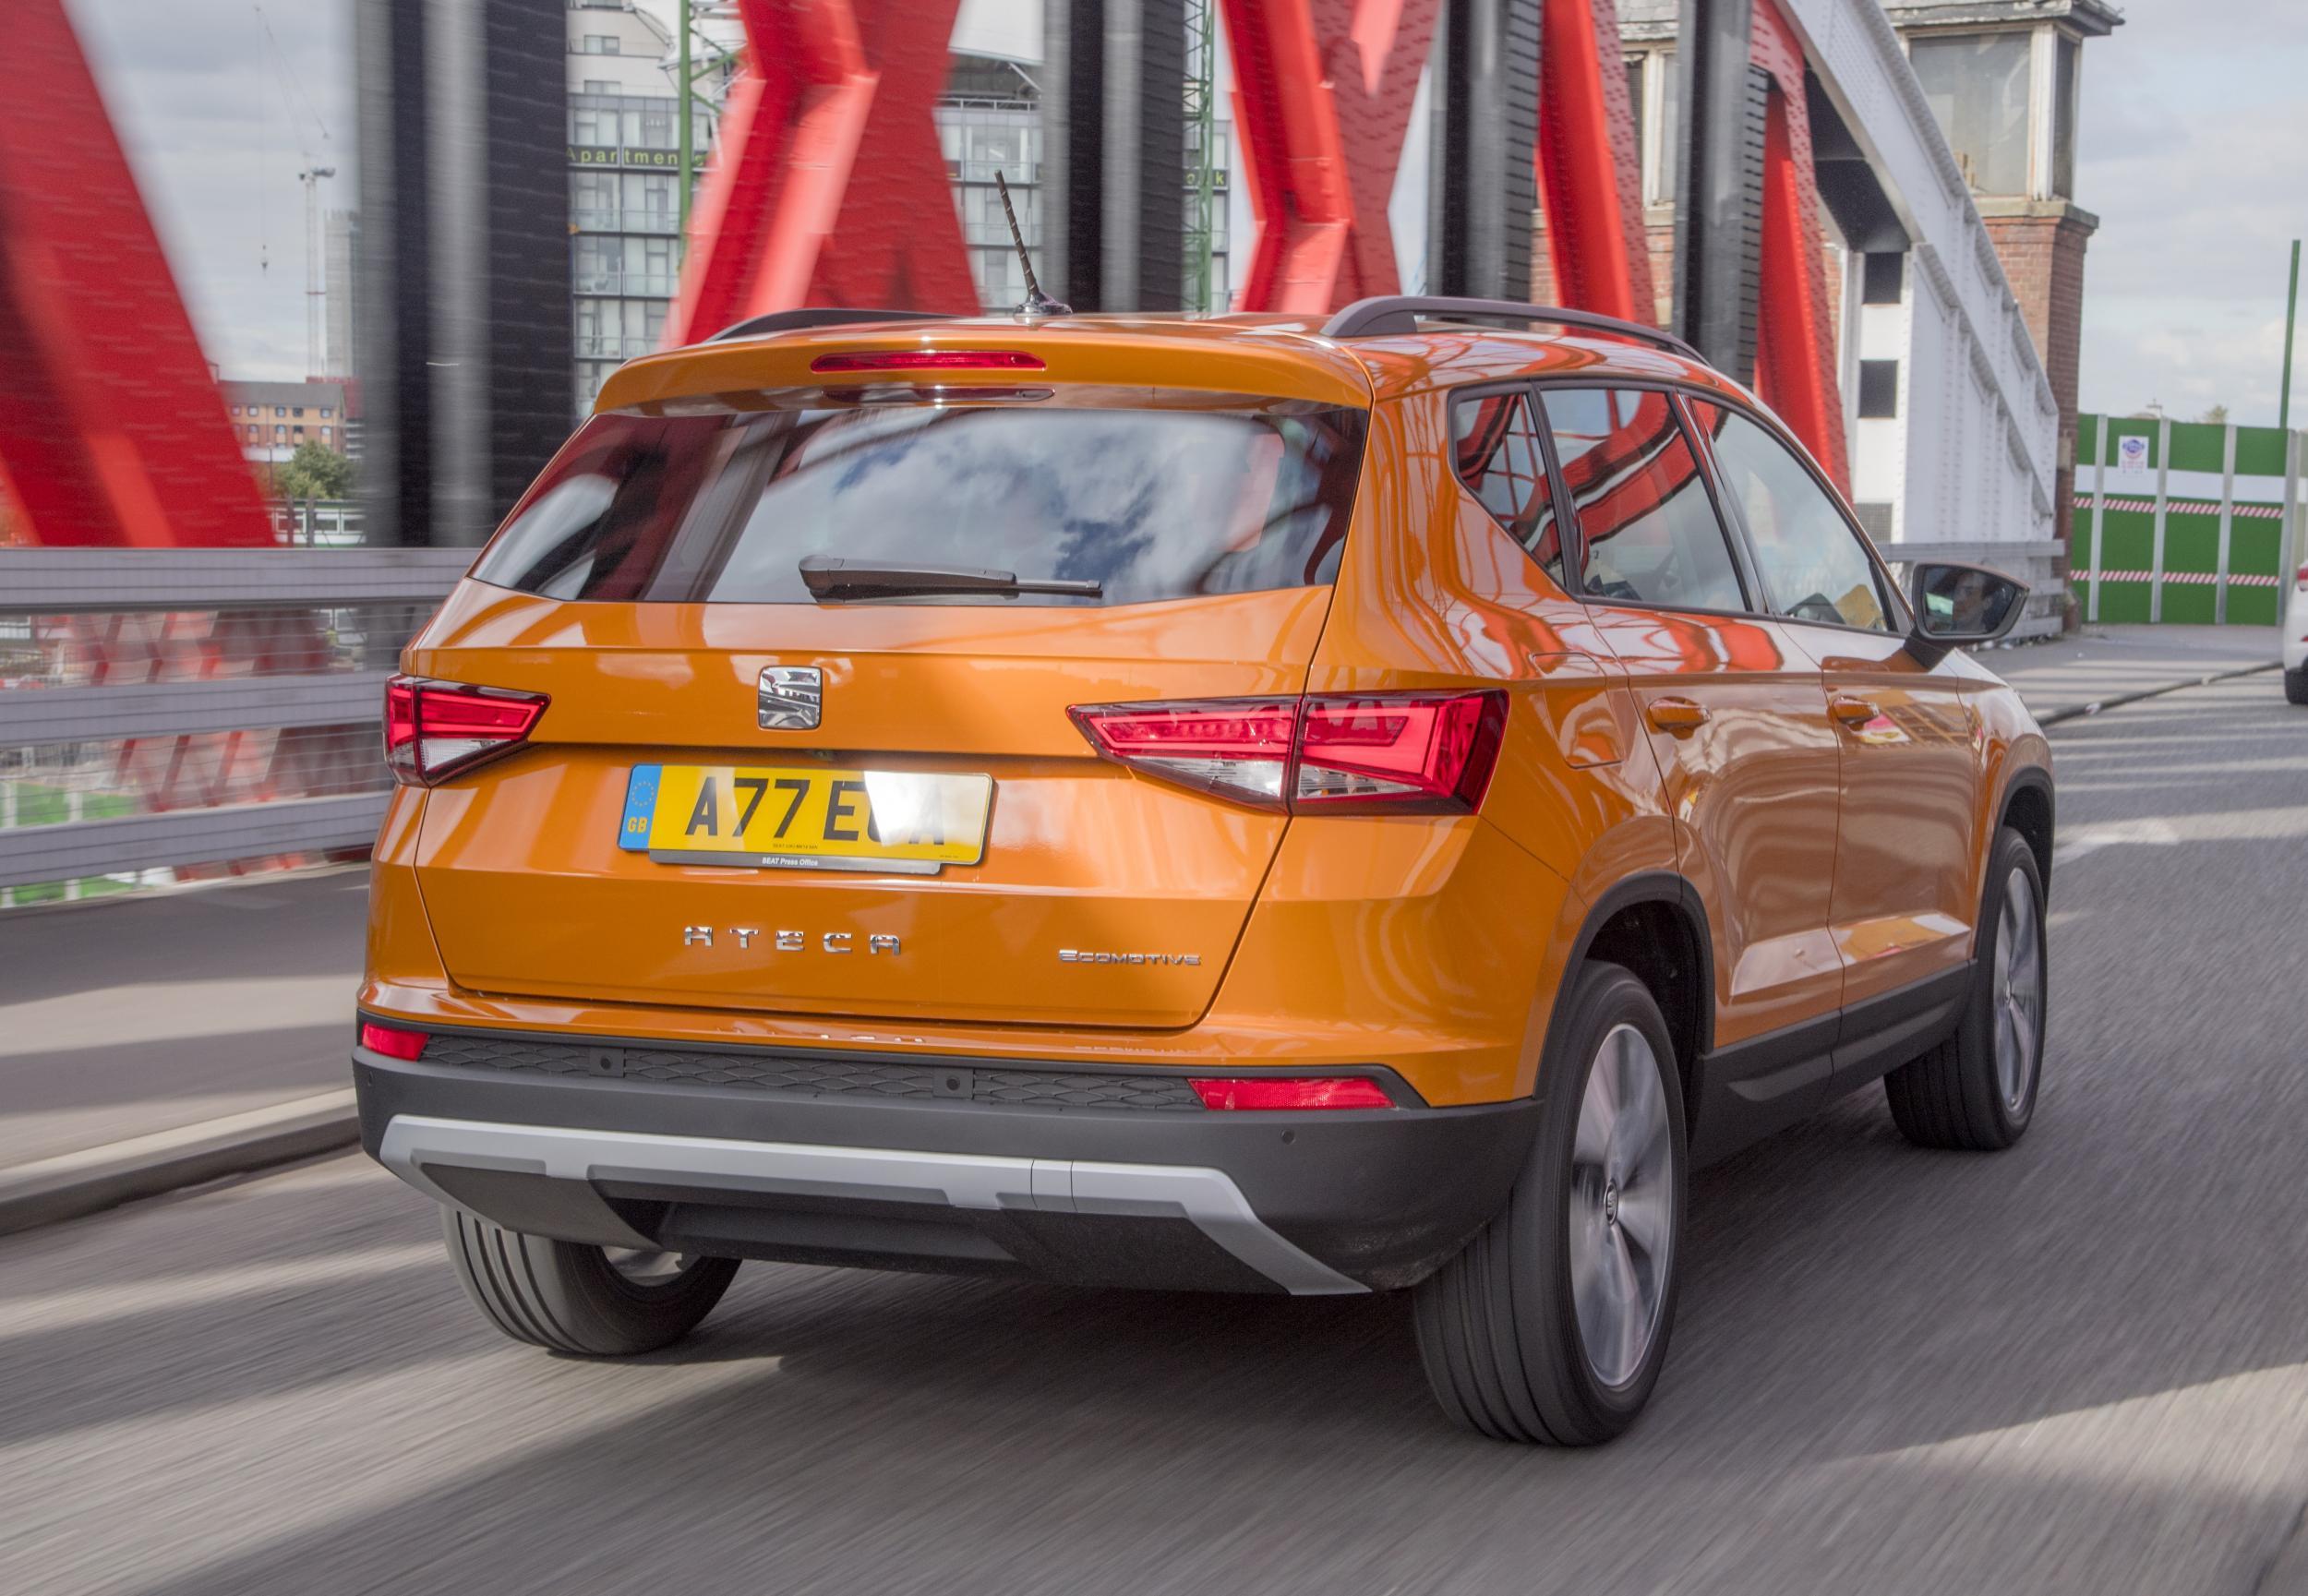 Seat's SUV is well suited to Britain's uneven and pot-holed highways